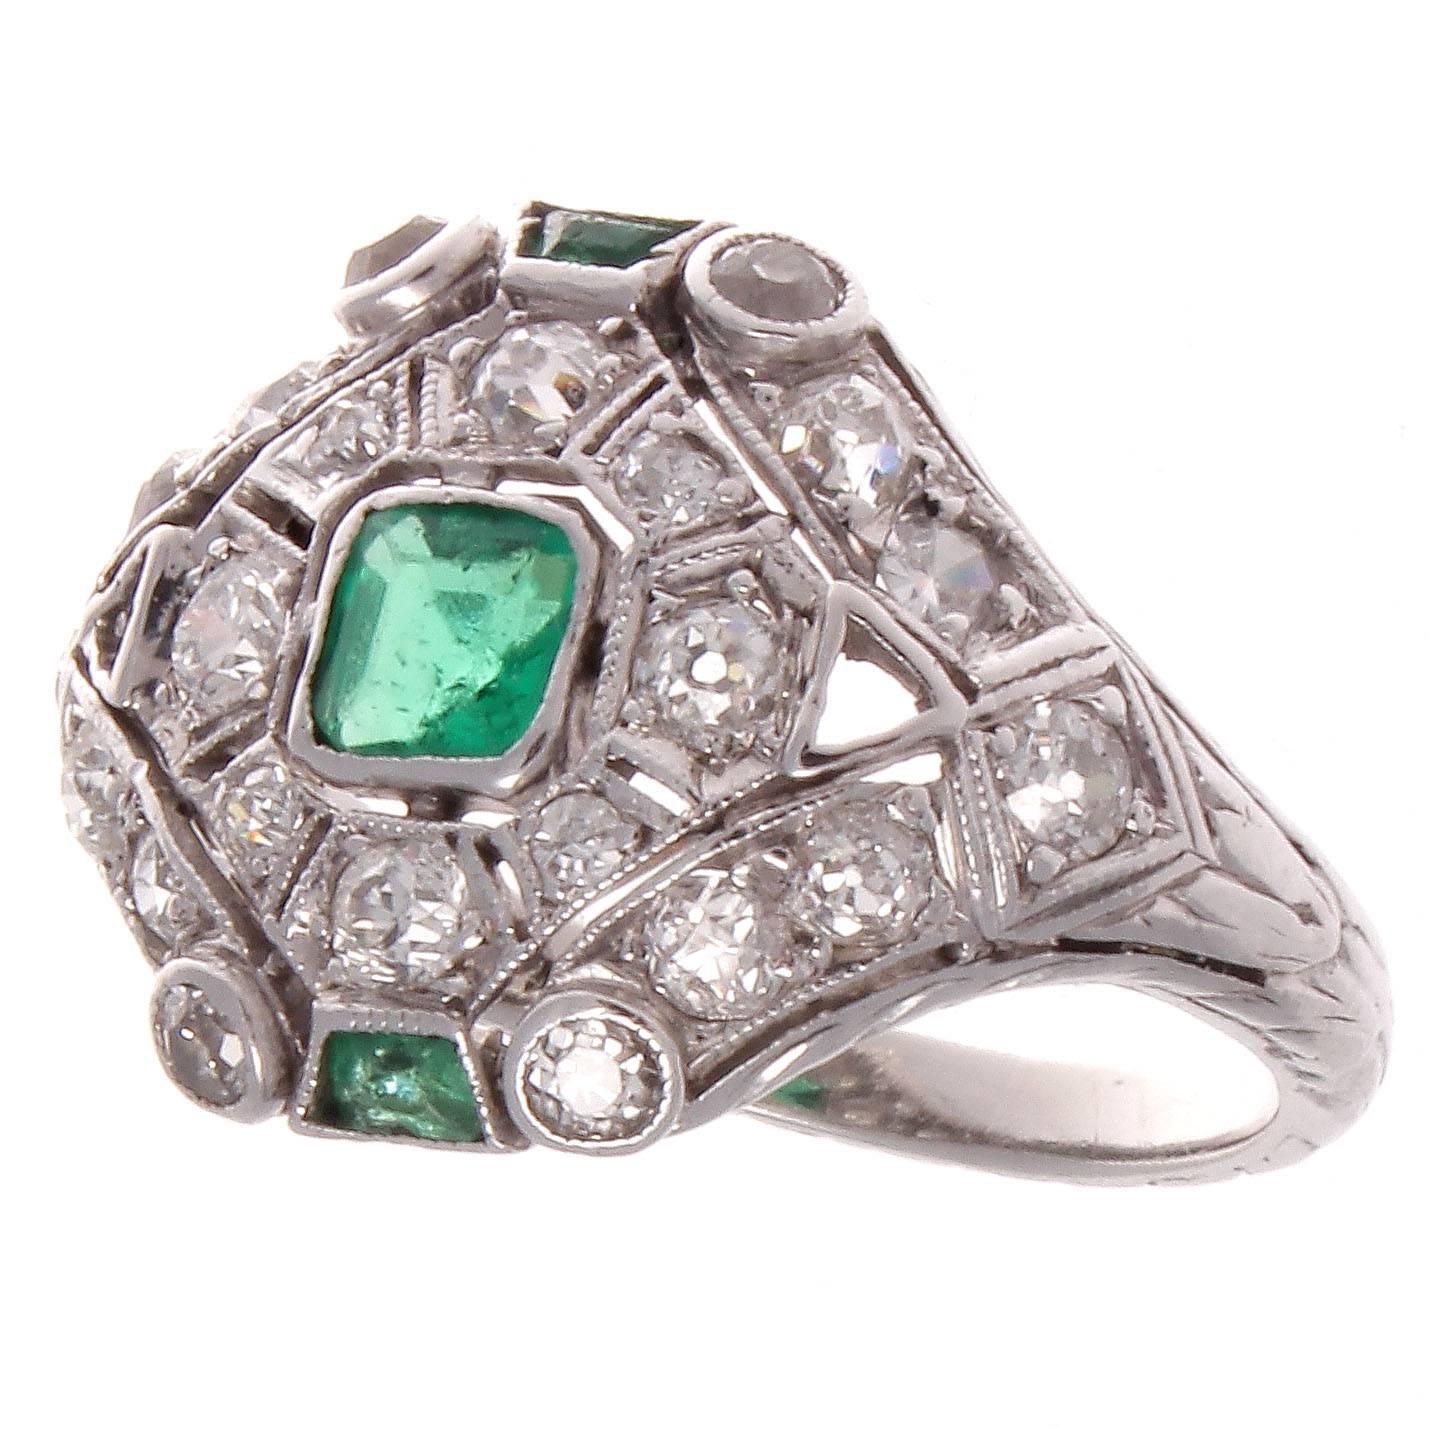 Intricate design that is expertly hand crafted. Exhibiting all techniques that made the art deco time period unforgettable. Featuring vivid green emeralds and perfectly placed white diamonds all set in the platinum ring.

Ring size 6 and may be